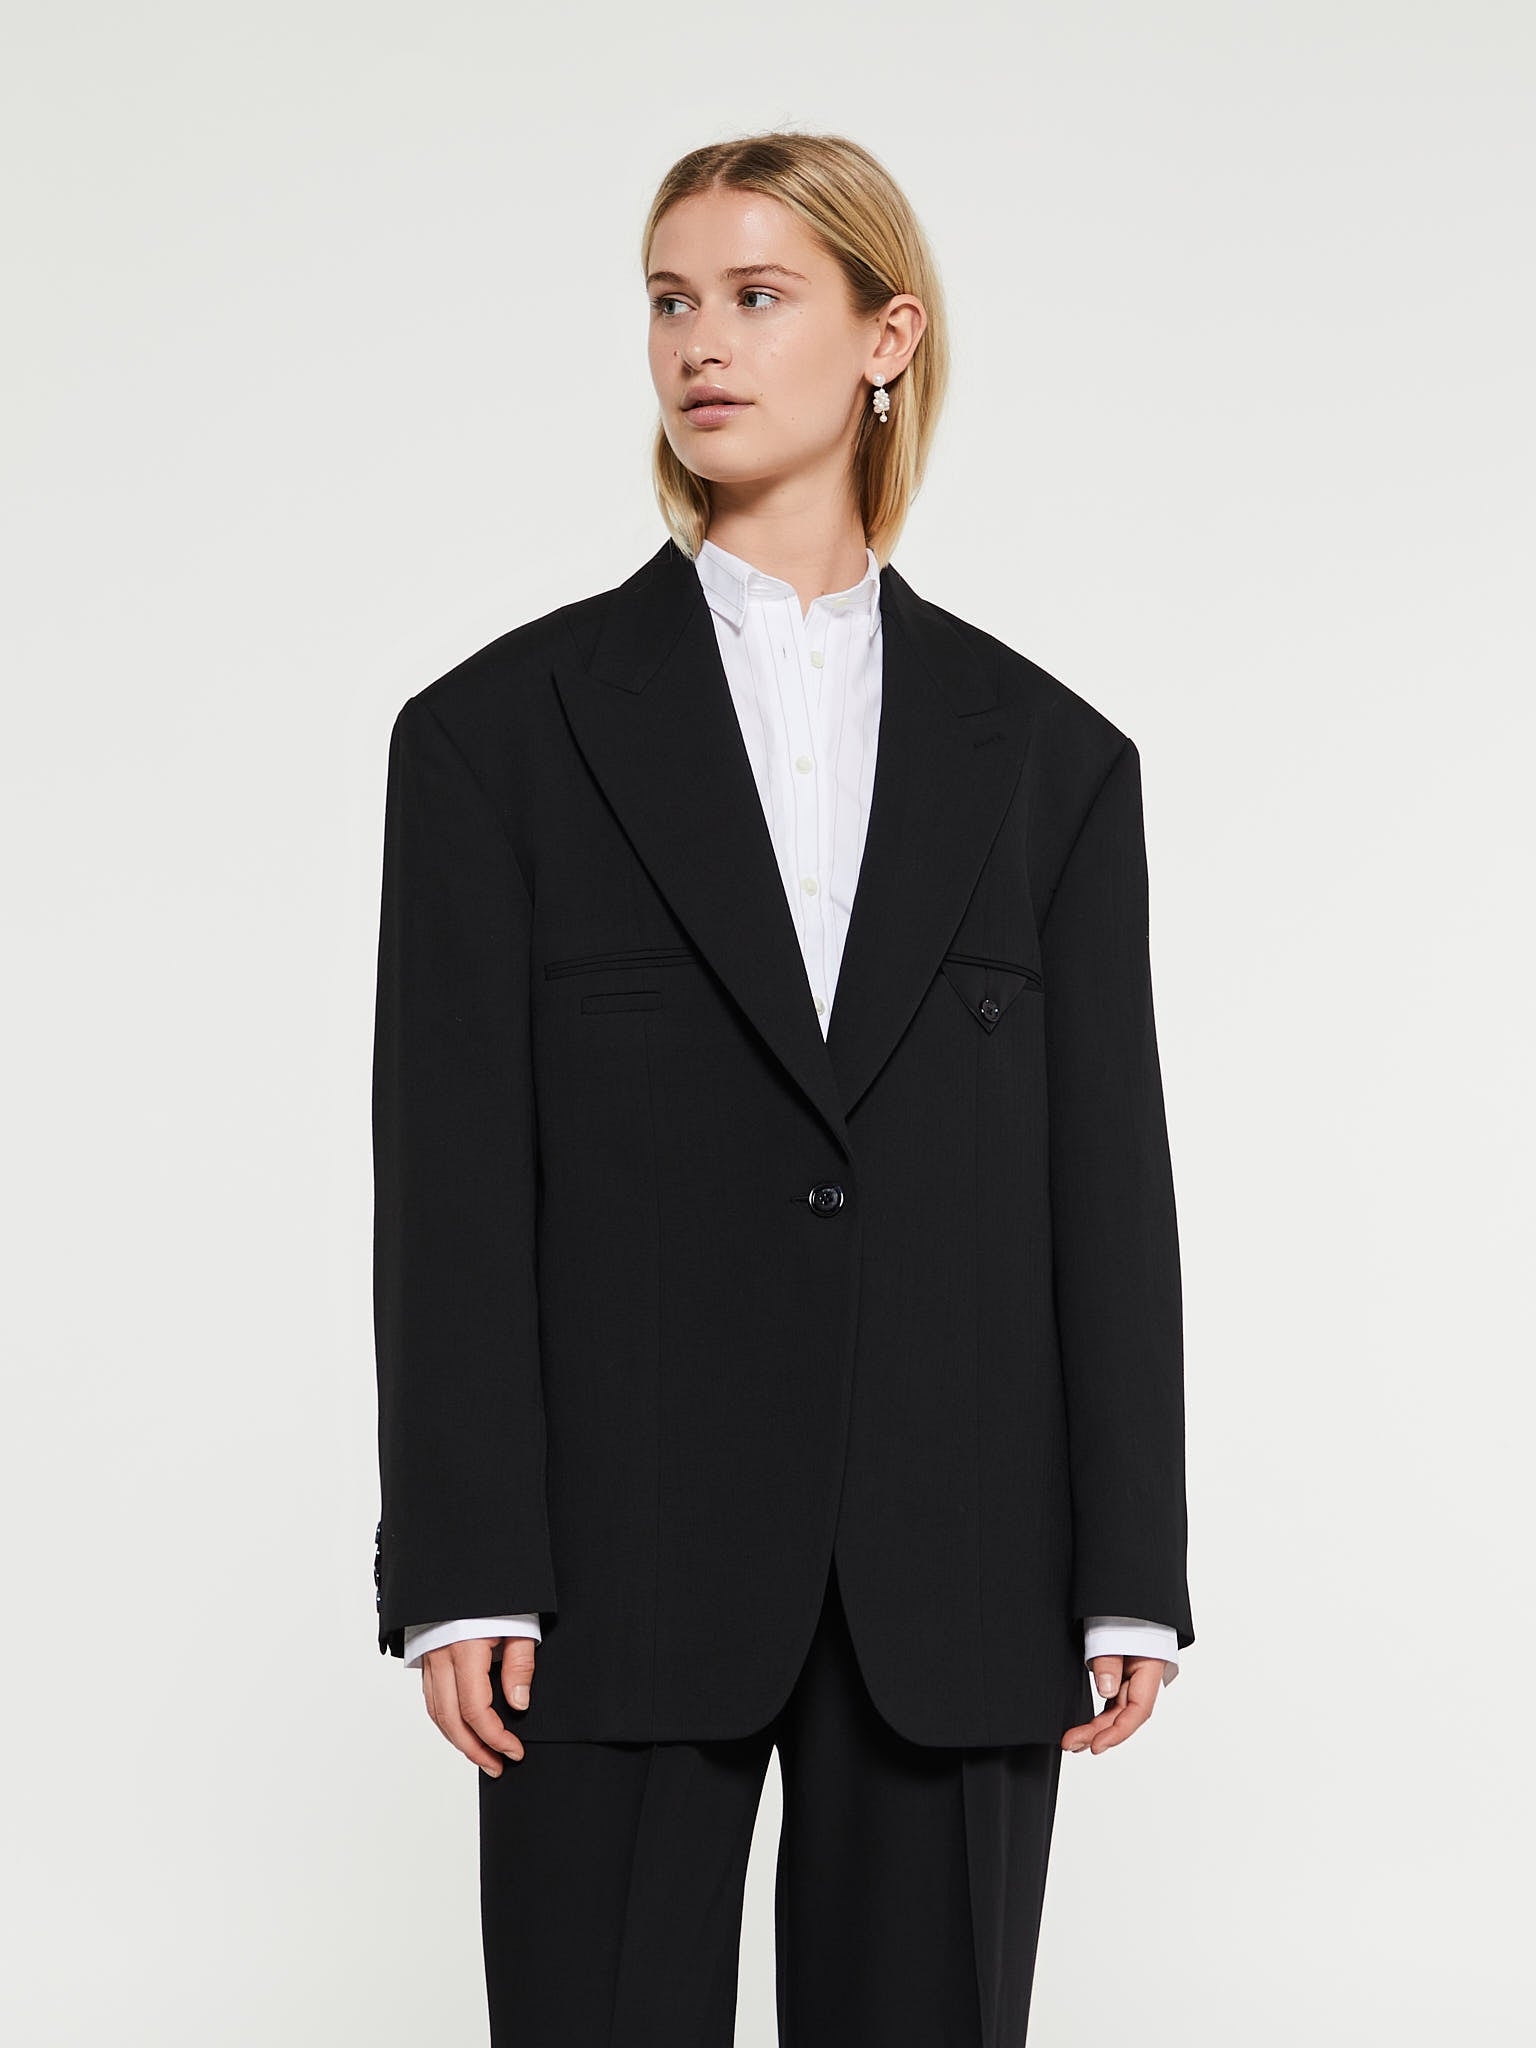 Single-Breasted Suit Jacket in Black